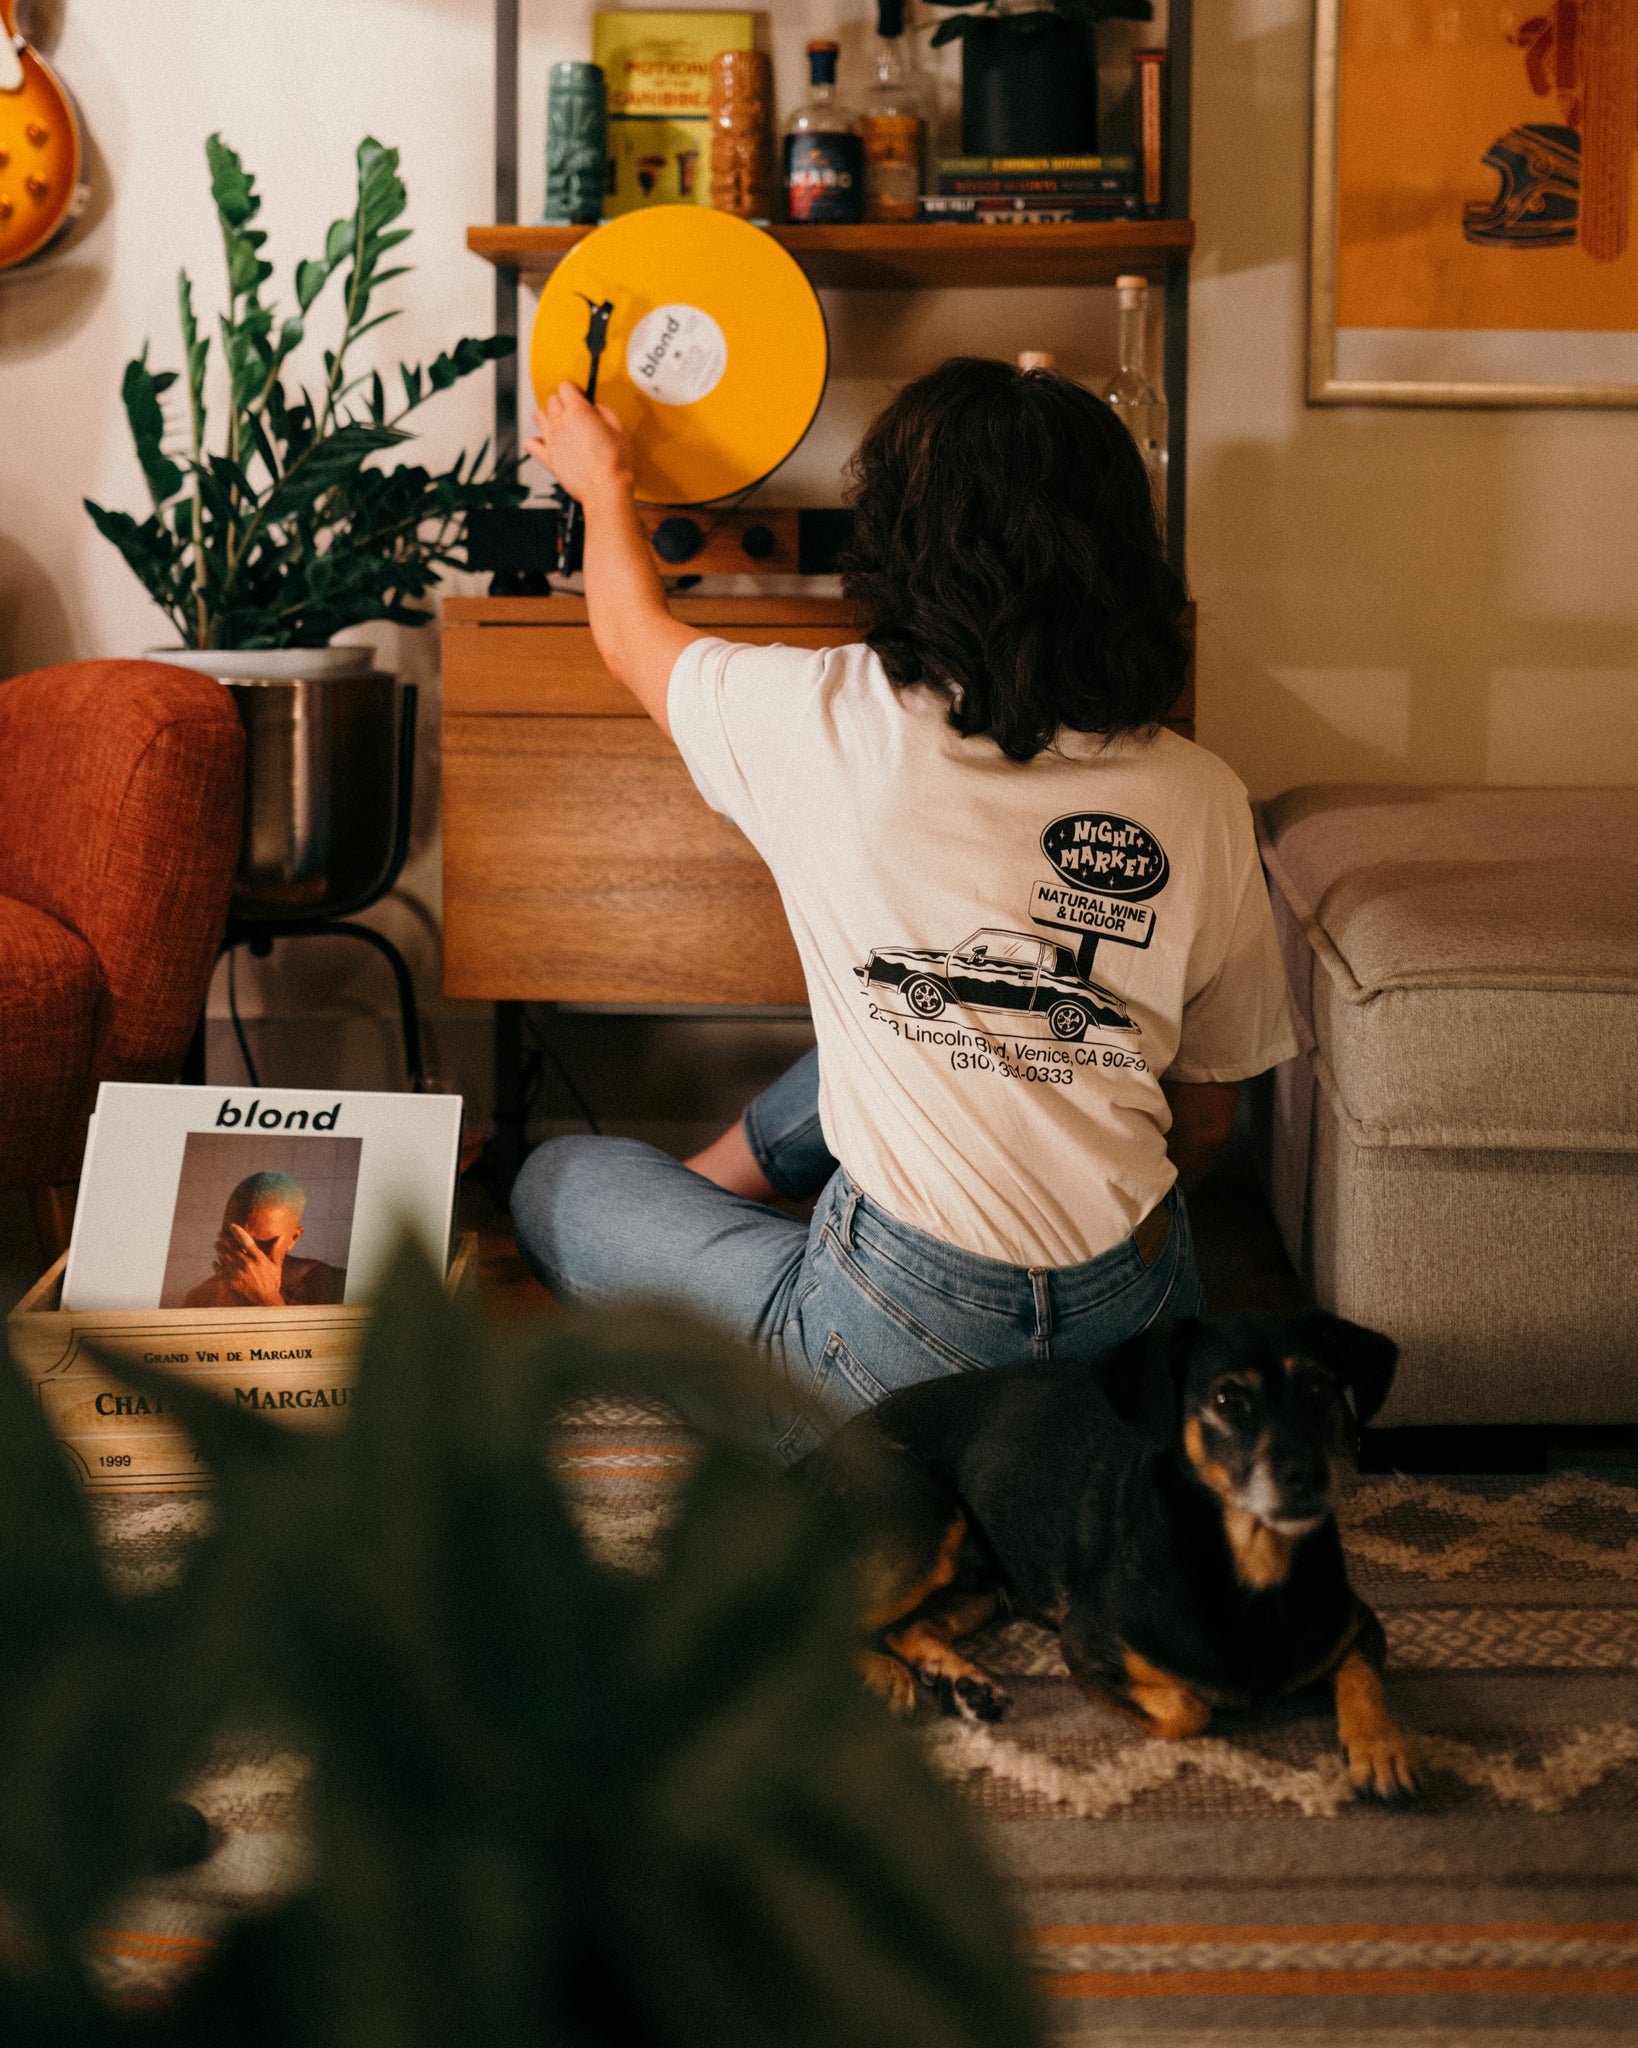 Girl wearing a Night Marketing restaurant t-shirt while listening to records.